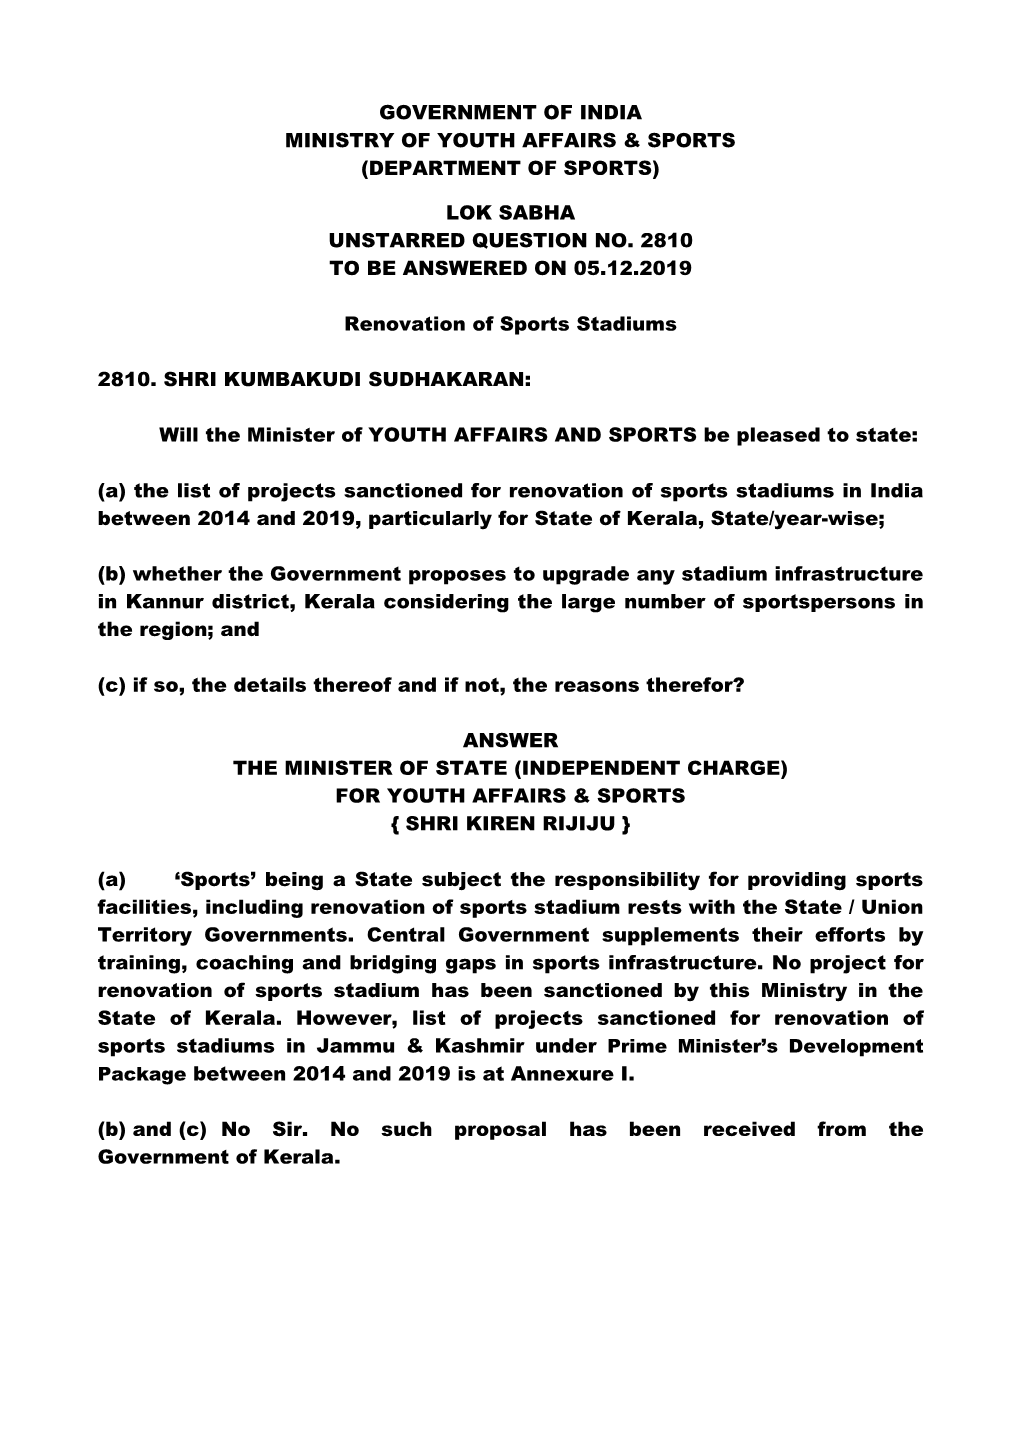 Lok Sabha Unstarred Question No. 2810 to Be Answered on 05.12.2019